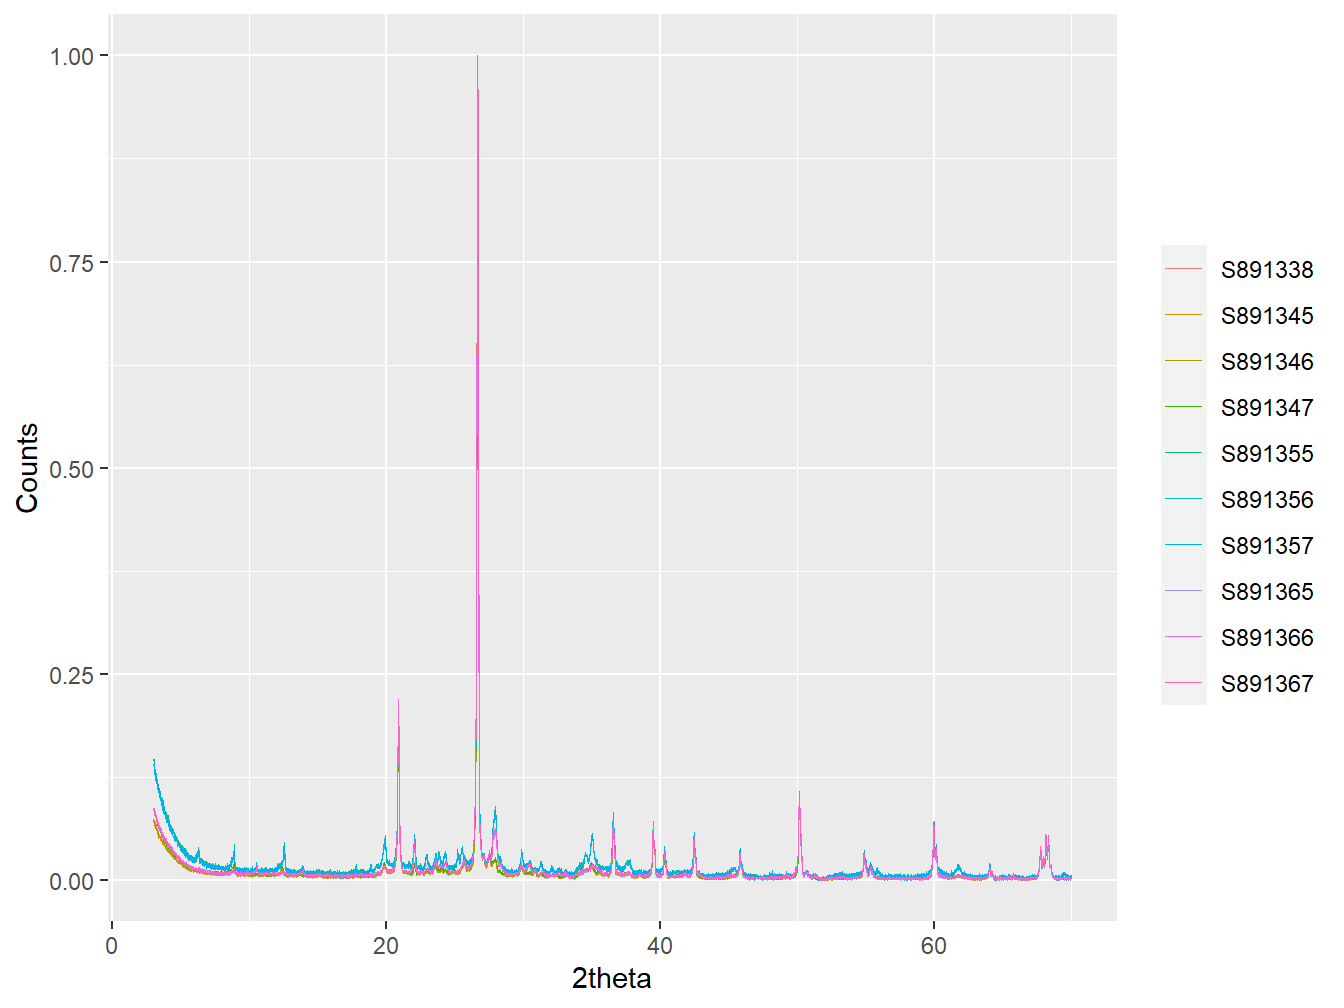 The first 10 samples in the scotland_xrpd data.